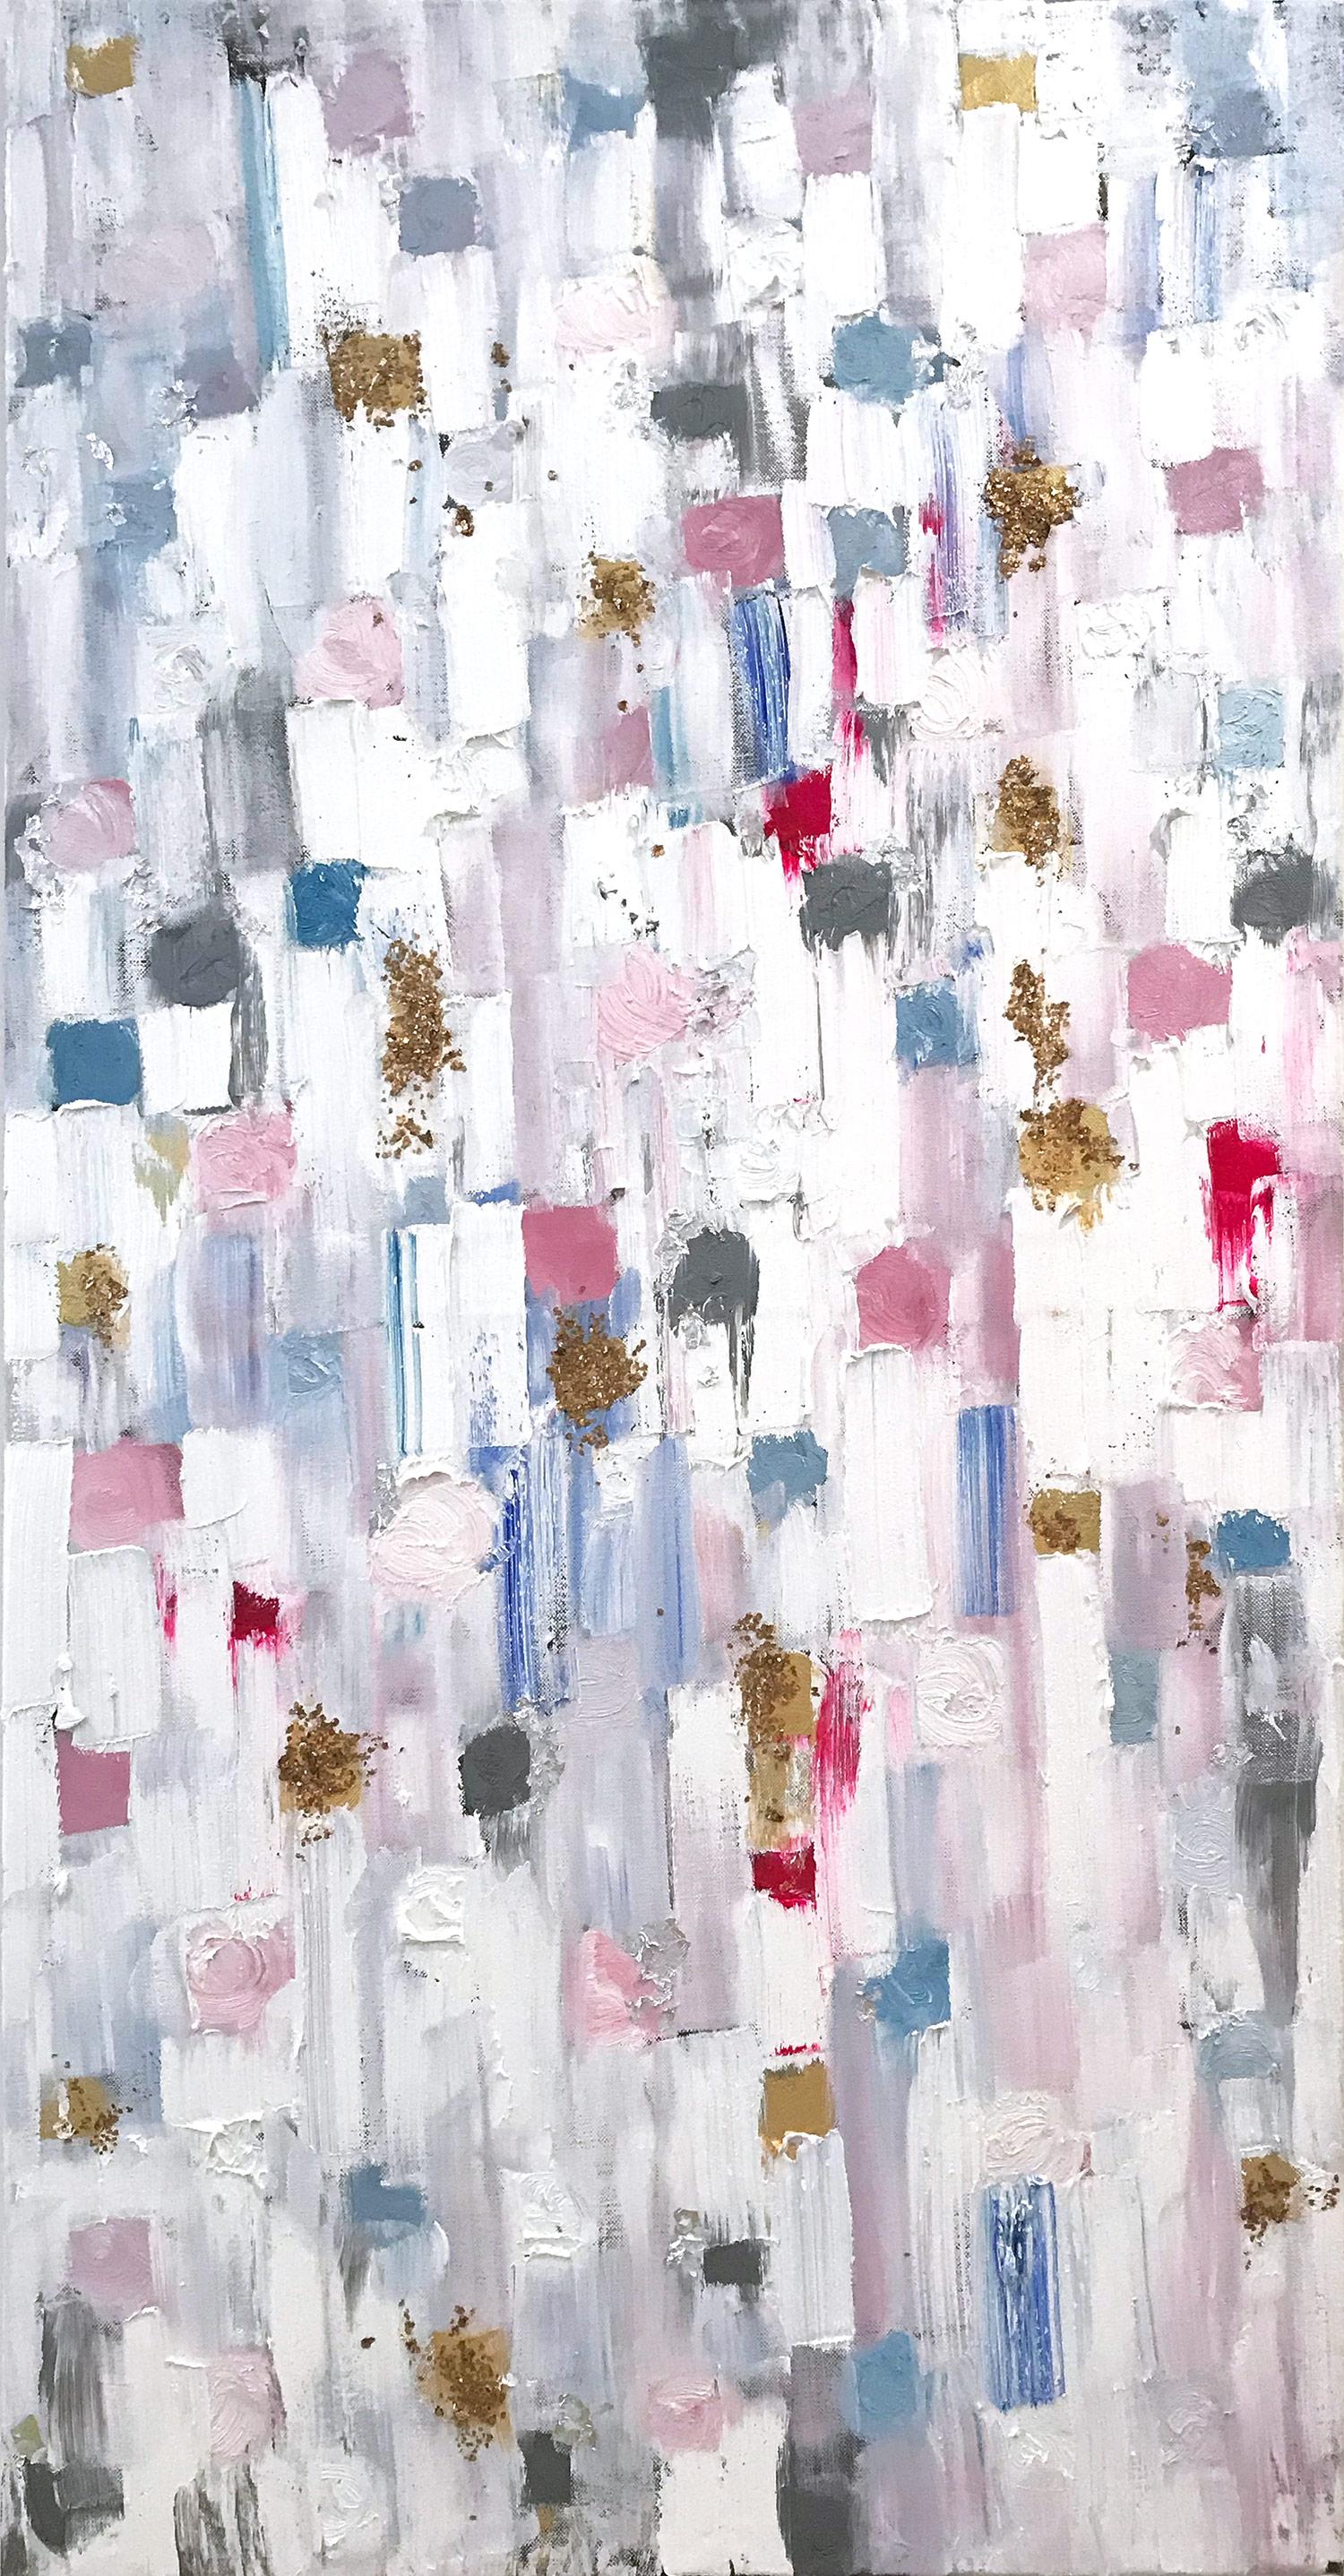 Cindy Shaoul Abstract Painting - "Dripping Dots - Hollywood" Colorful Abstract Oil Painting on Canvas 